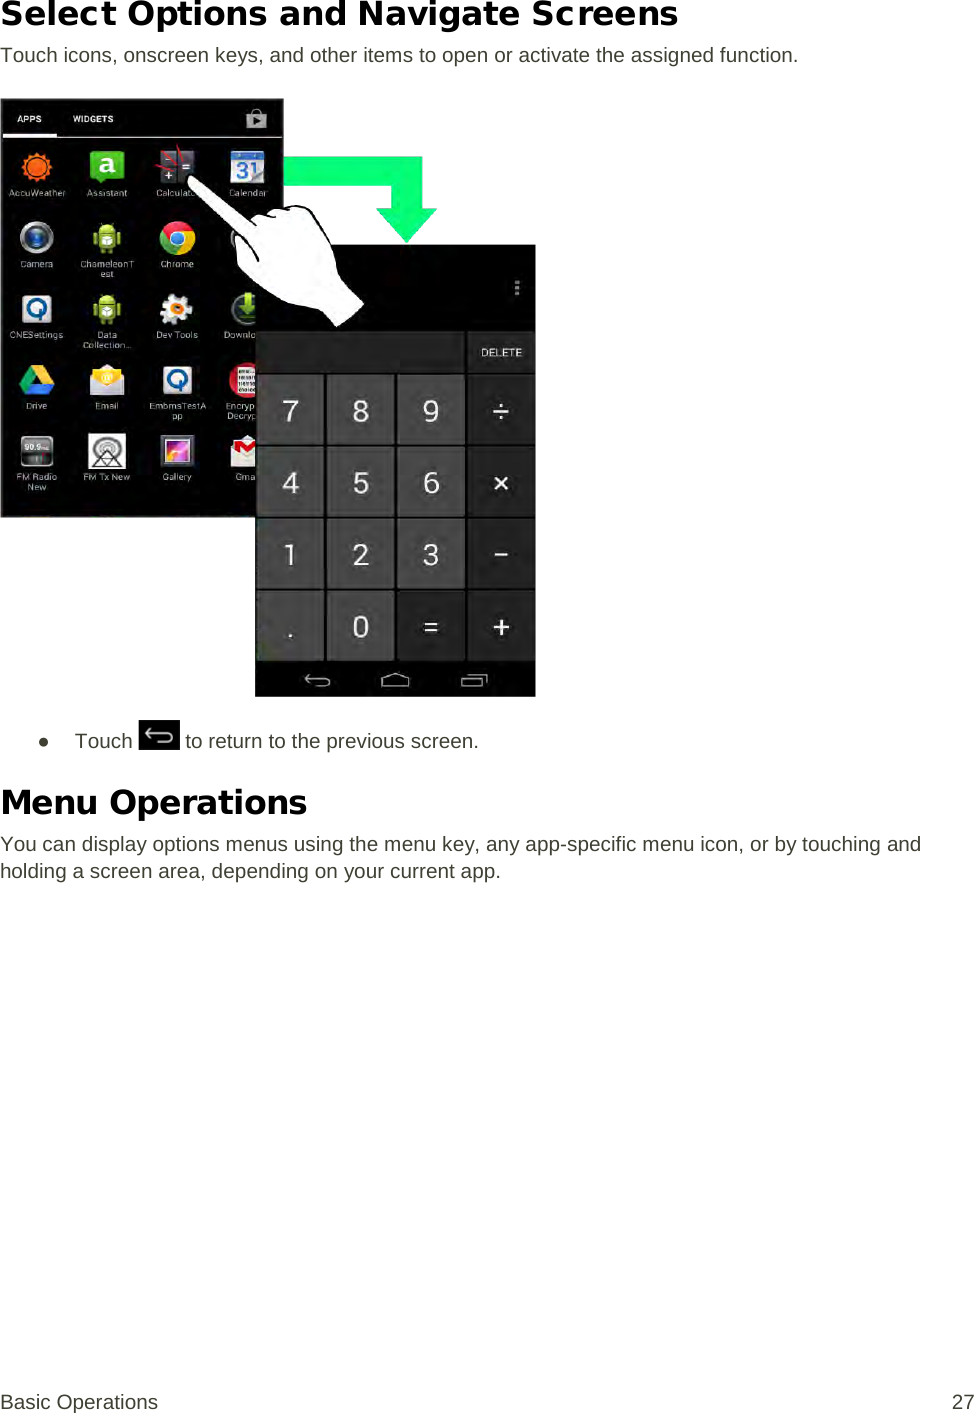 Select Options and Navigate Screens Touch icons, onscreen keys, and other items to open or activate the assigned function.   ● Touch   to return to the previous screen. Menu Operations You can display options menus using the menu key, any app-specific menu icon, or by touching and holding a screen area, depending on your current app. Basic Operations 27 